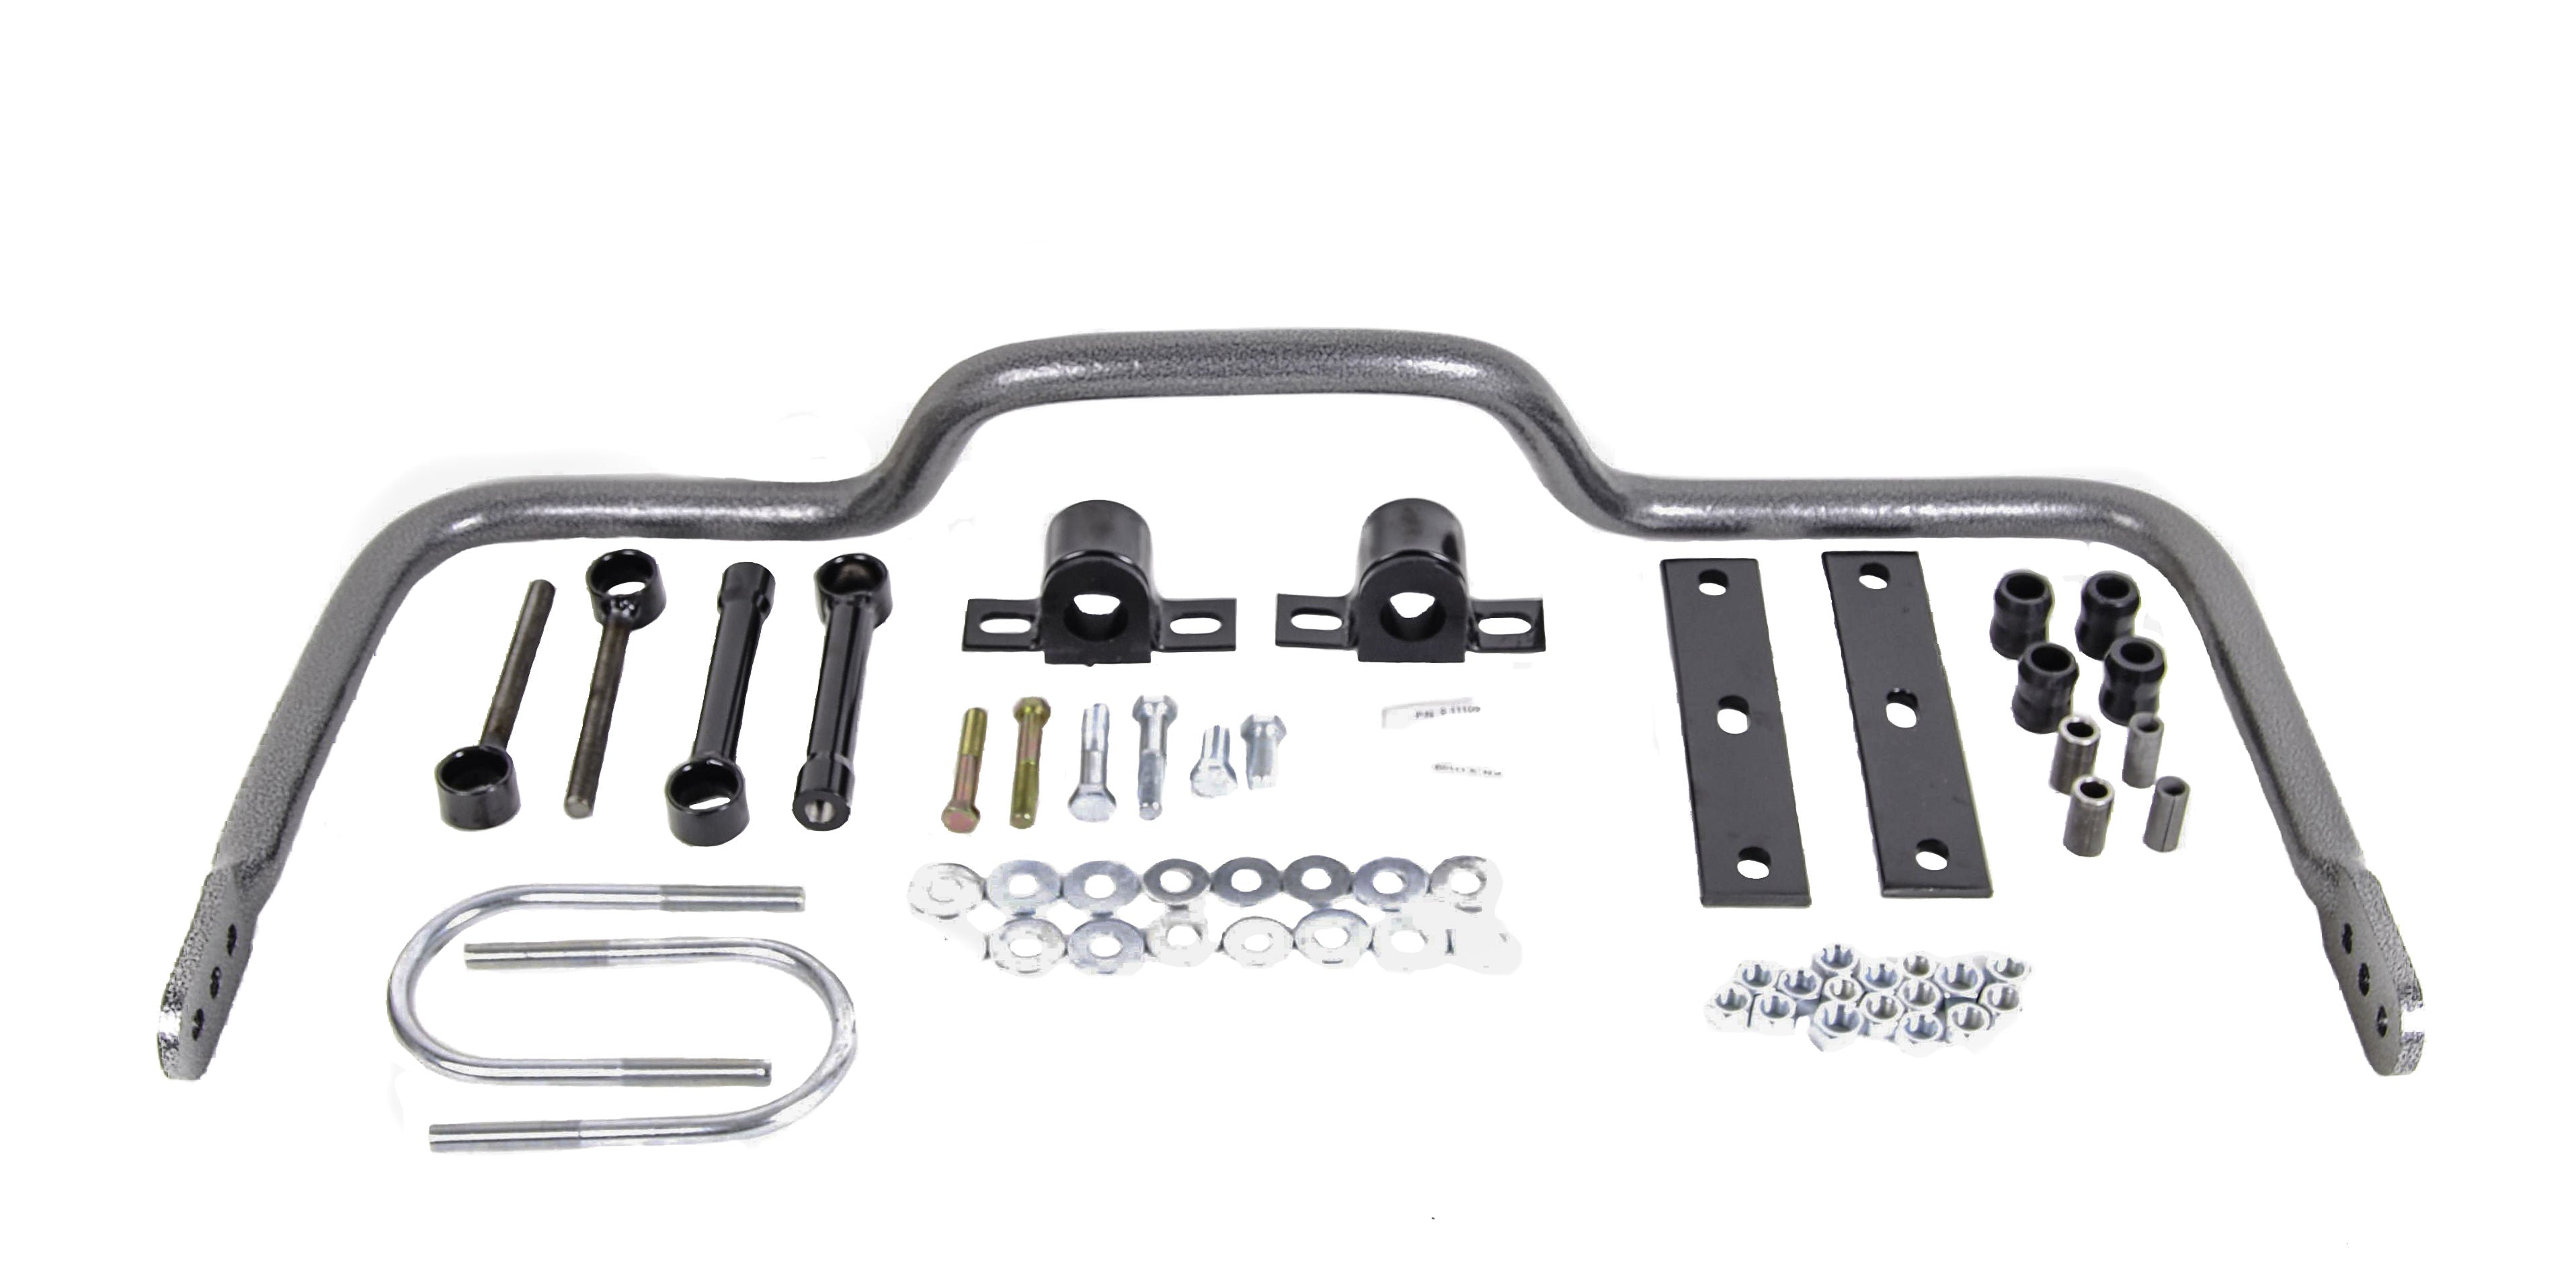 Hellwig 7643 - Rear Sway Bar Kit for Ford Excursion 00-05 2WD/4WD